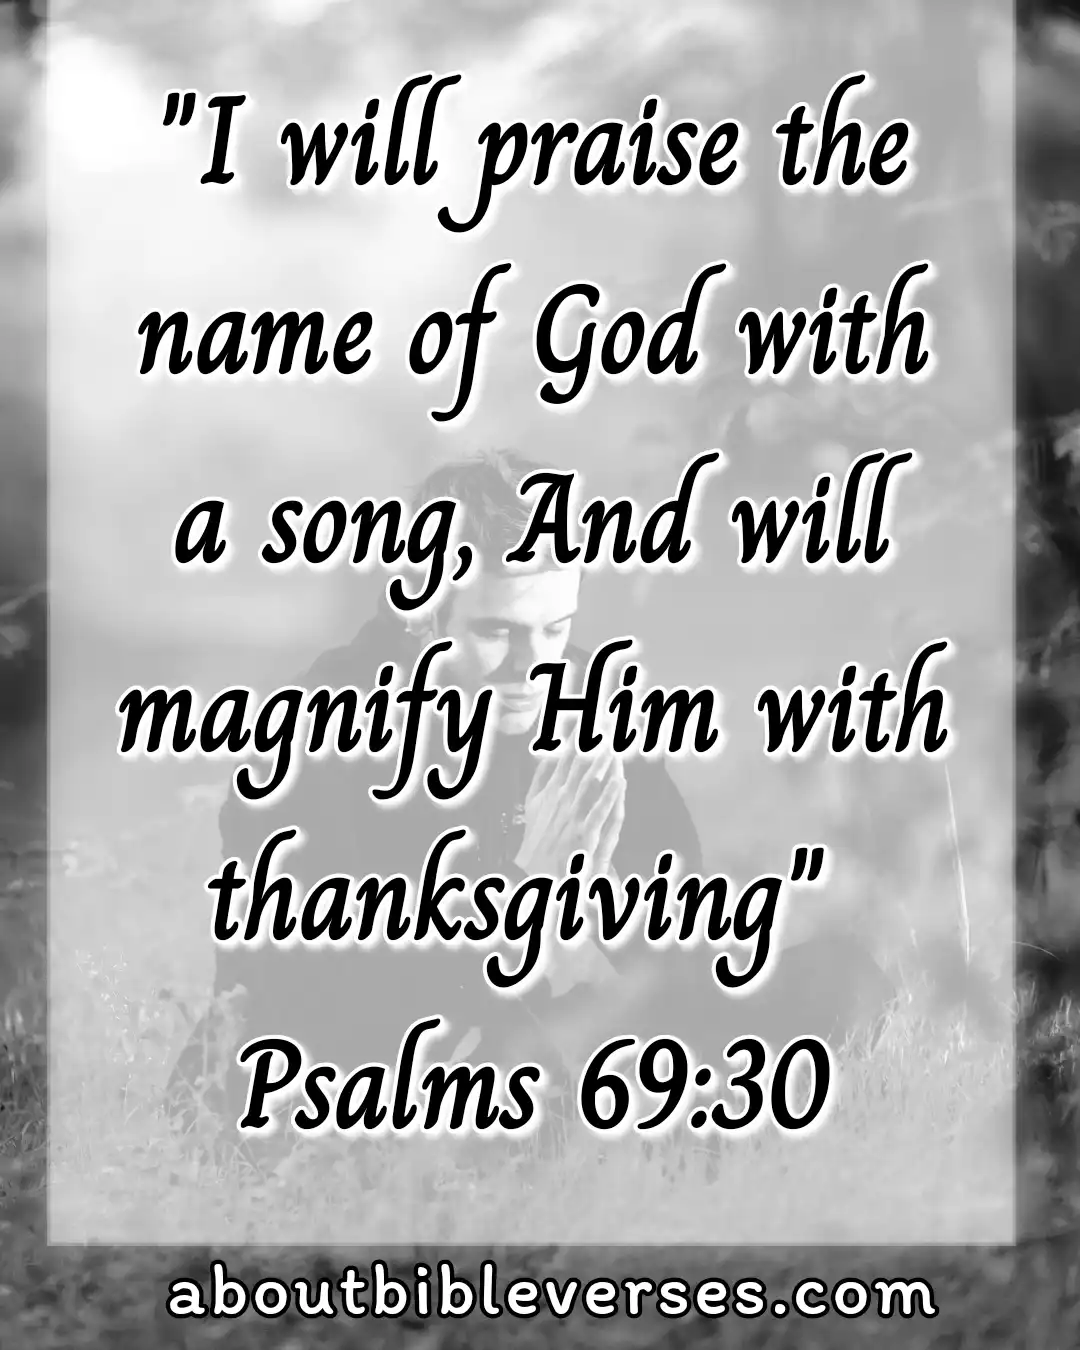 Today bible verse (Psalm 69:30)